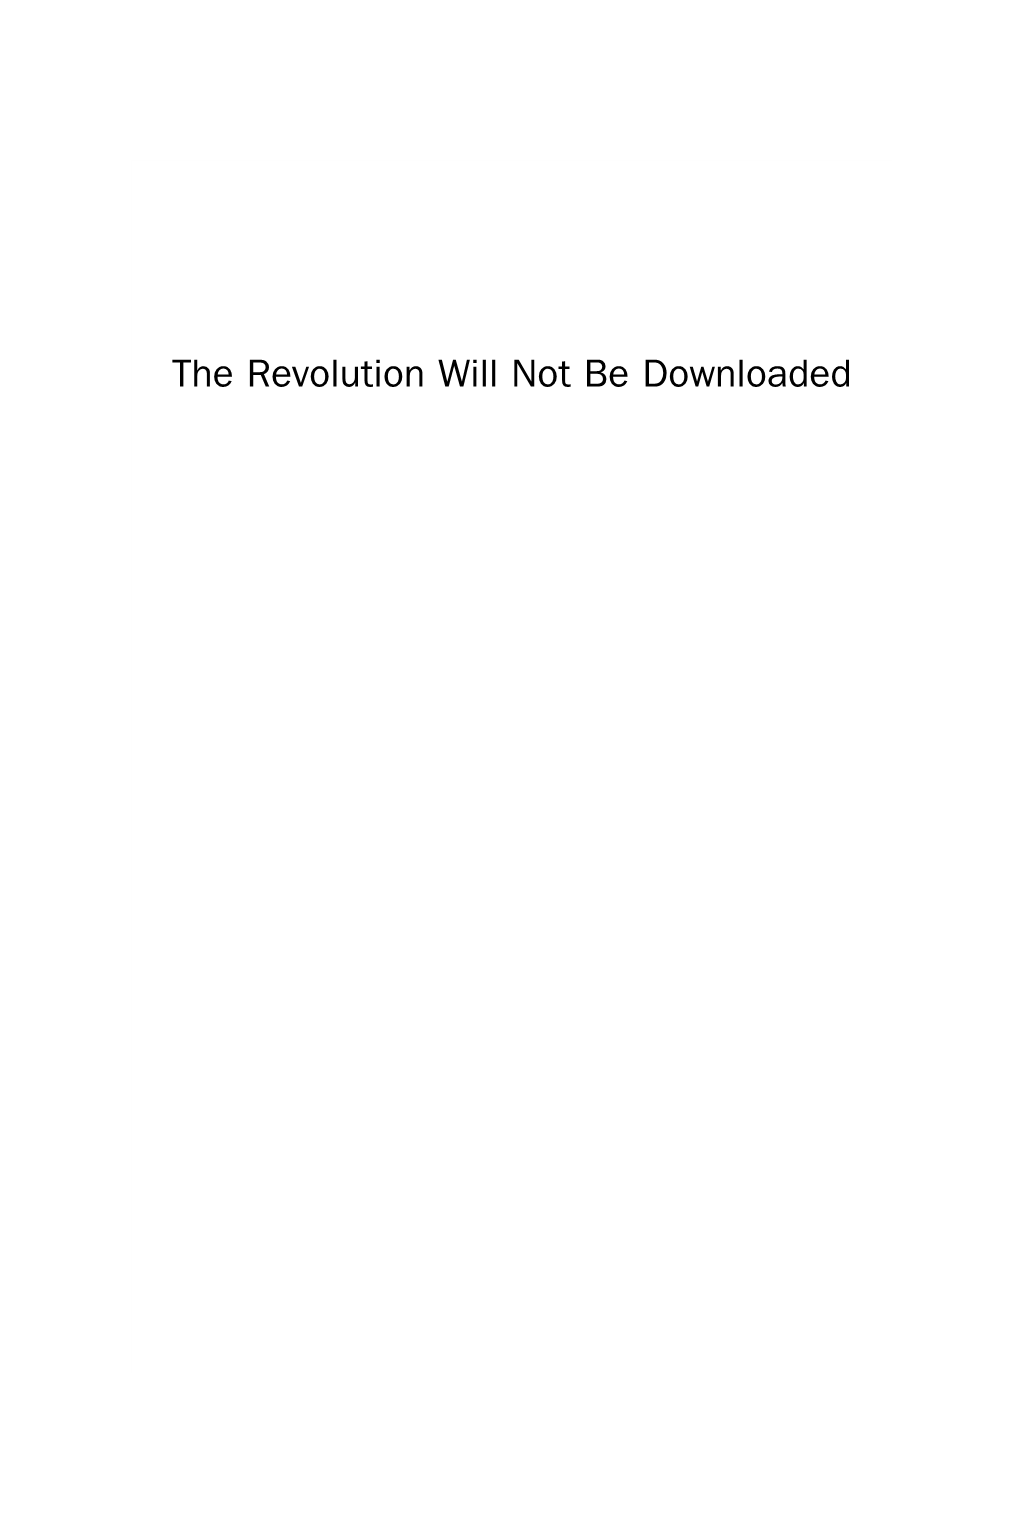 The Revolution Will Not Be Downloaded CHANDOS INTERNET SERIES